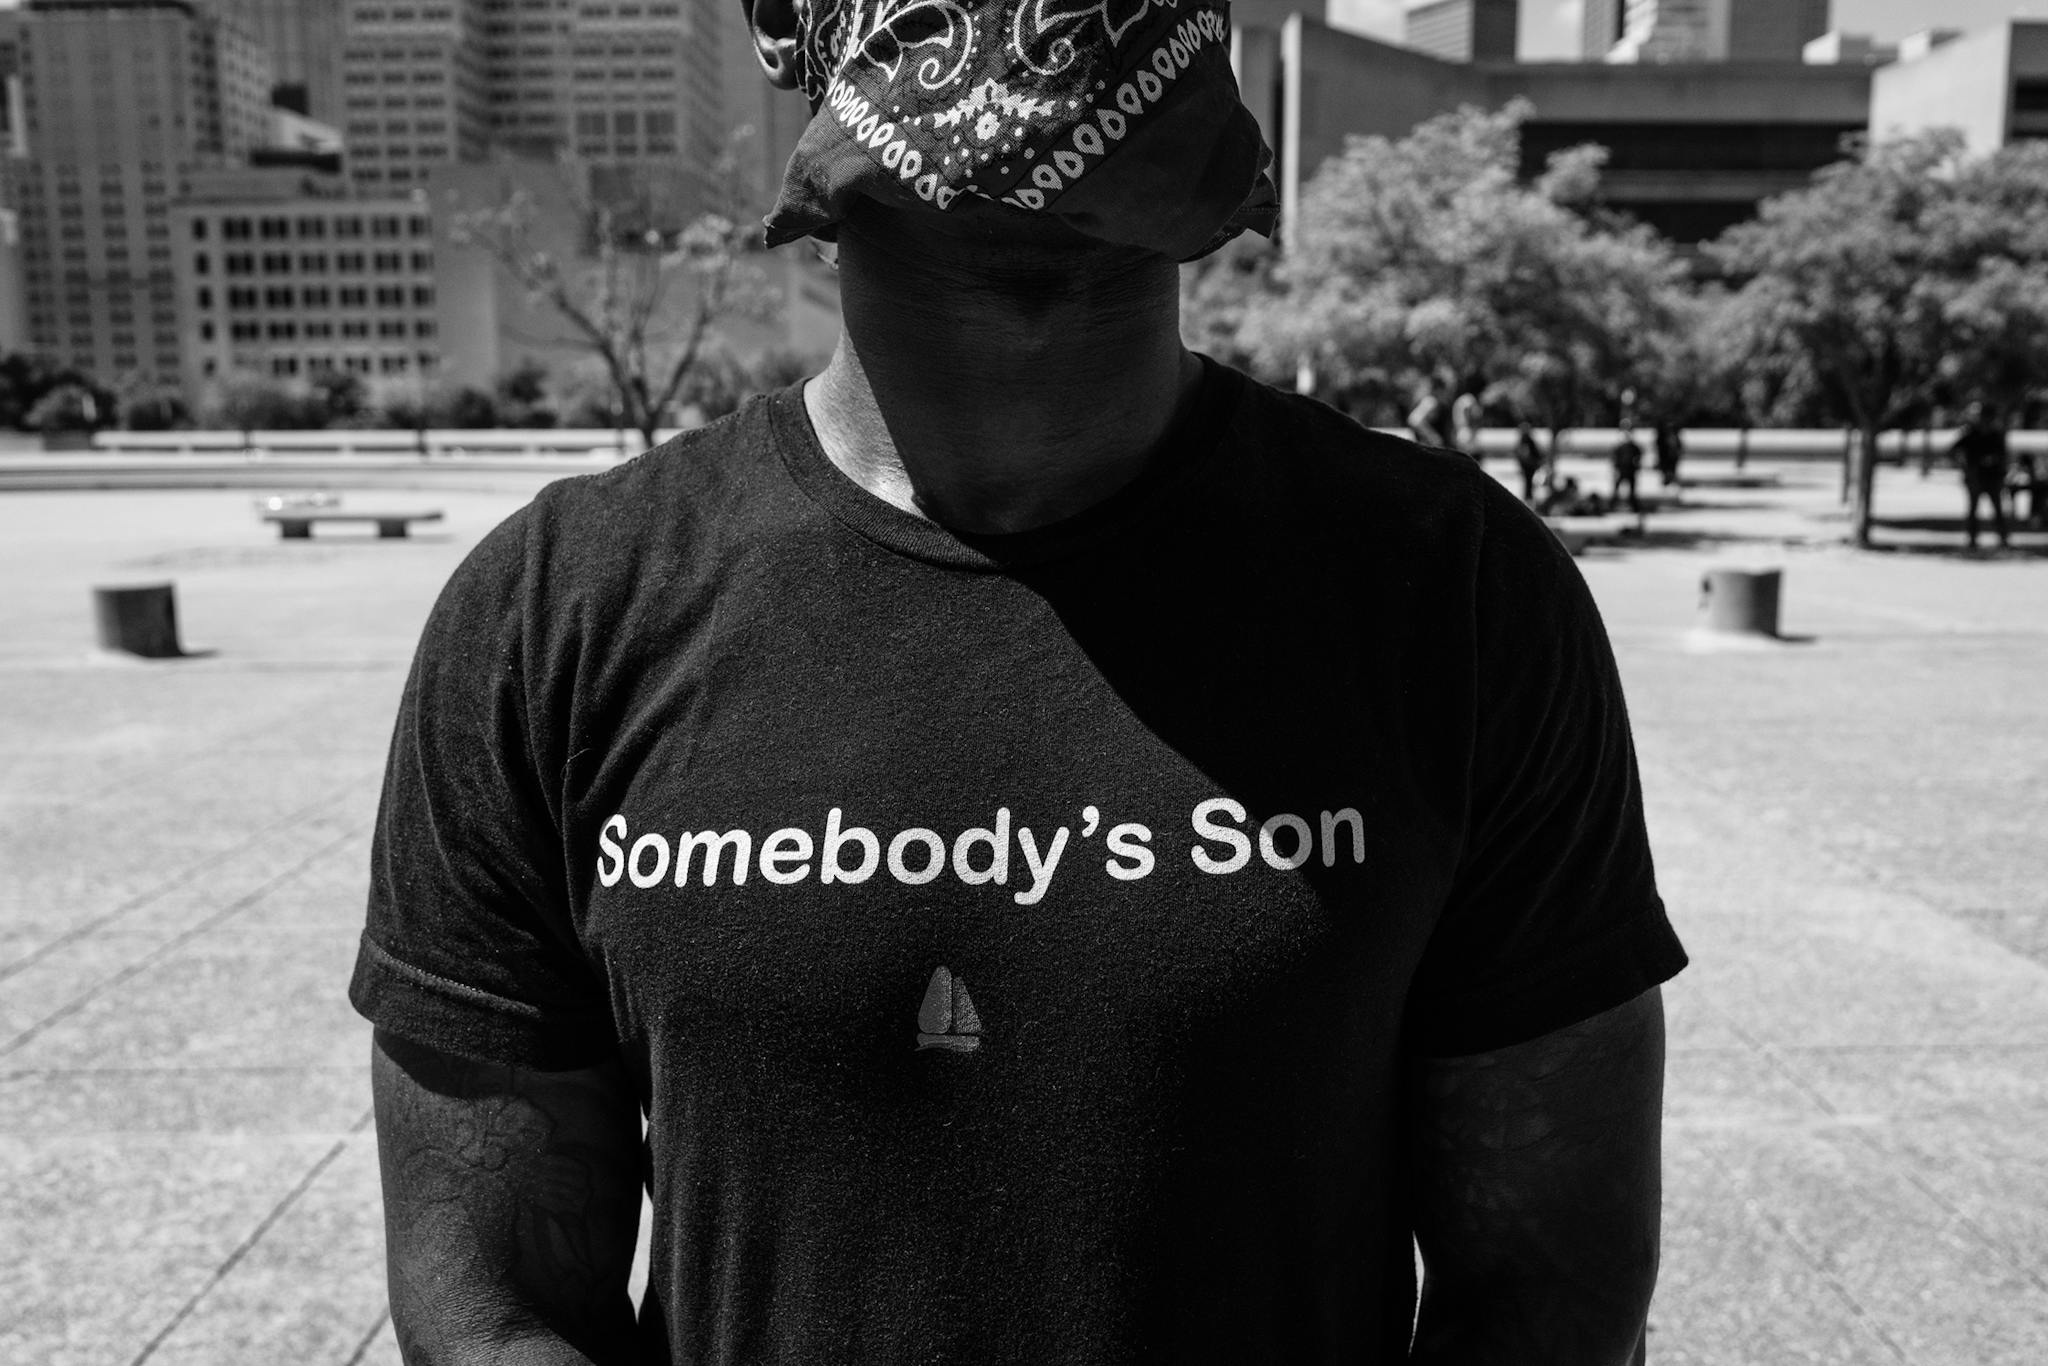 A young man named Sammy B. attends the protest gathering at Dallas City Hall on June 3, 2020.